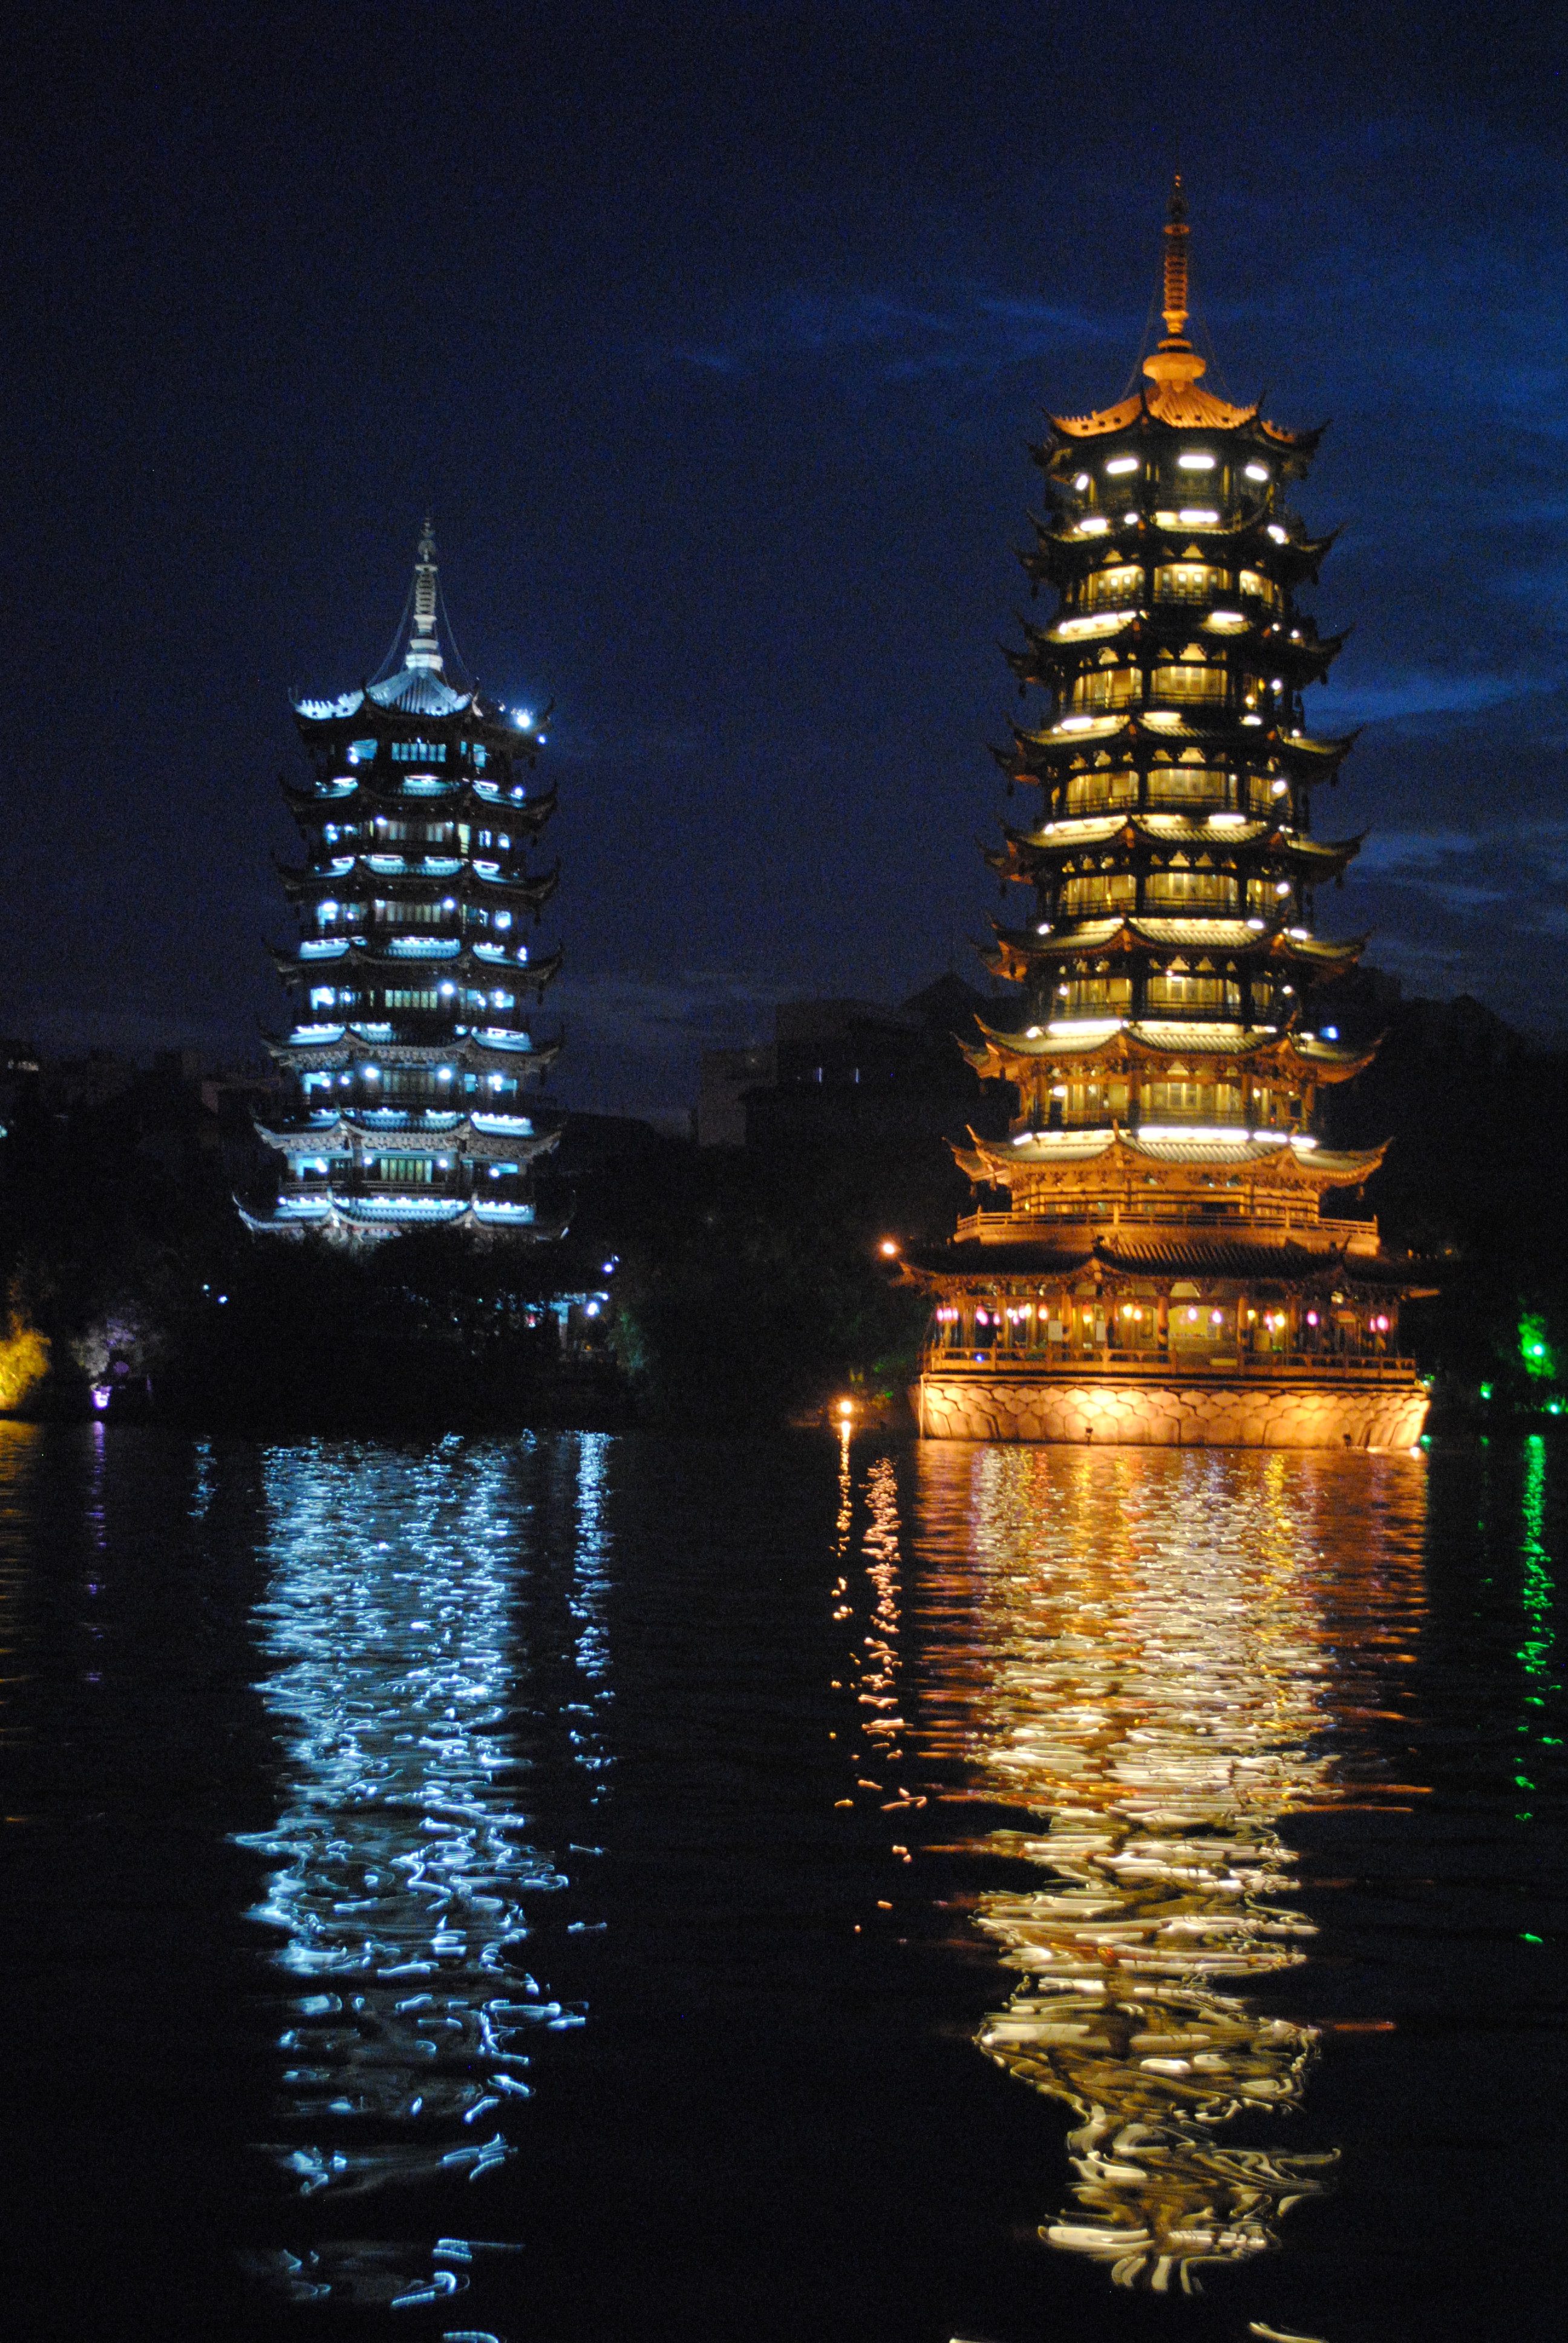 The Guilin towers in Guangxi province, China. It is nighttime and the towers are lit up.